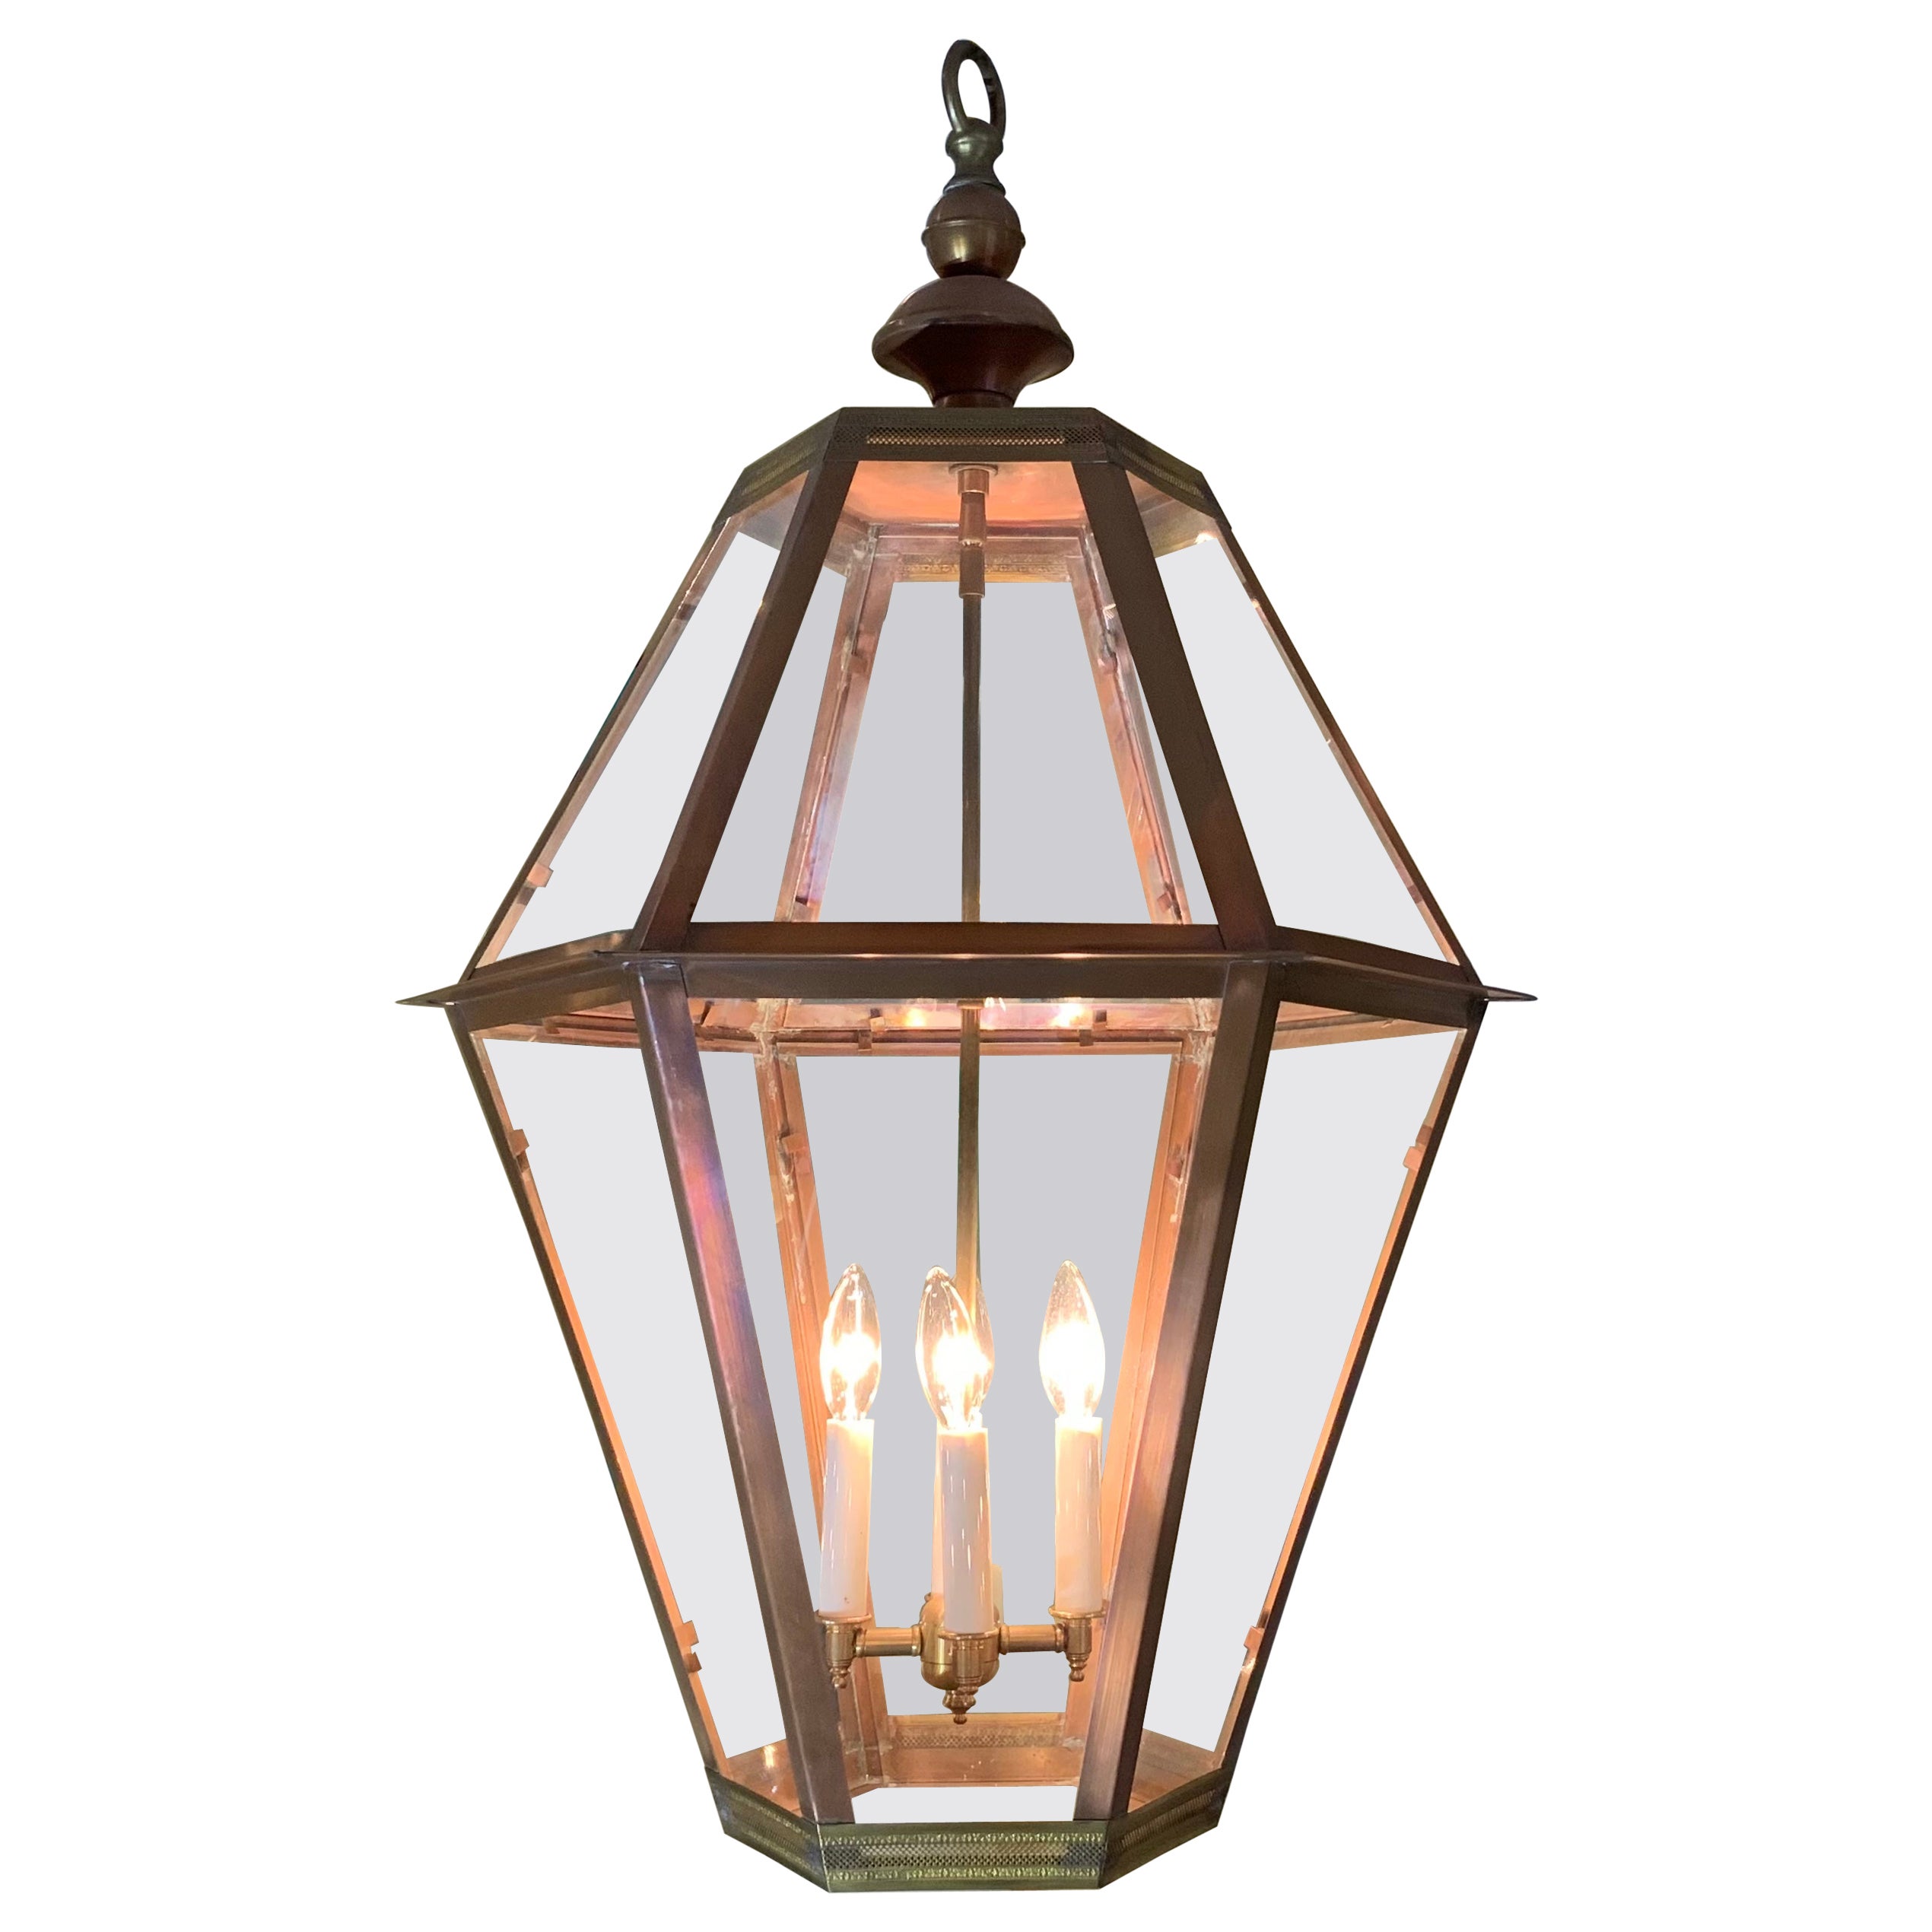 Large Handcrafted Six Sides Solid Copper and Brass Hanging Lantern